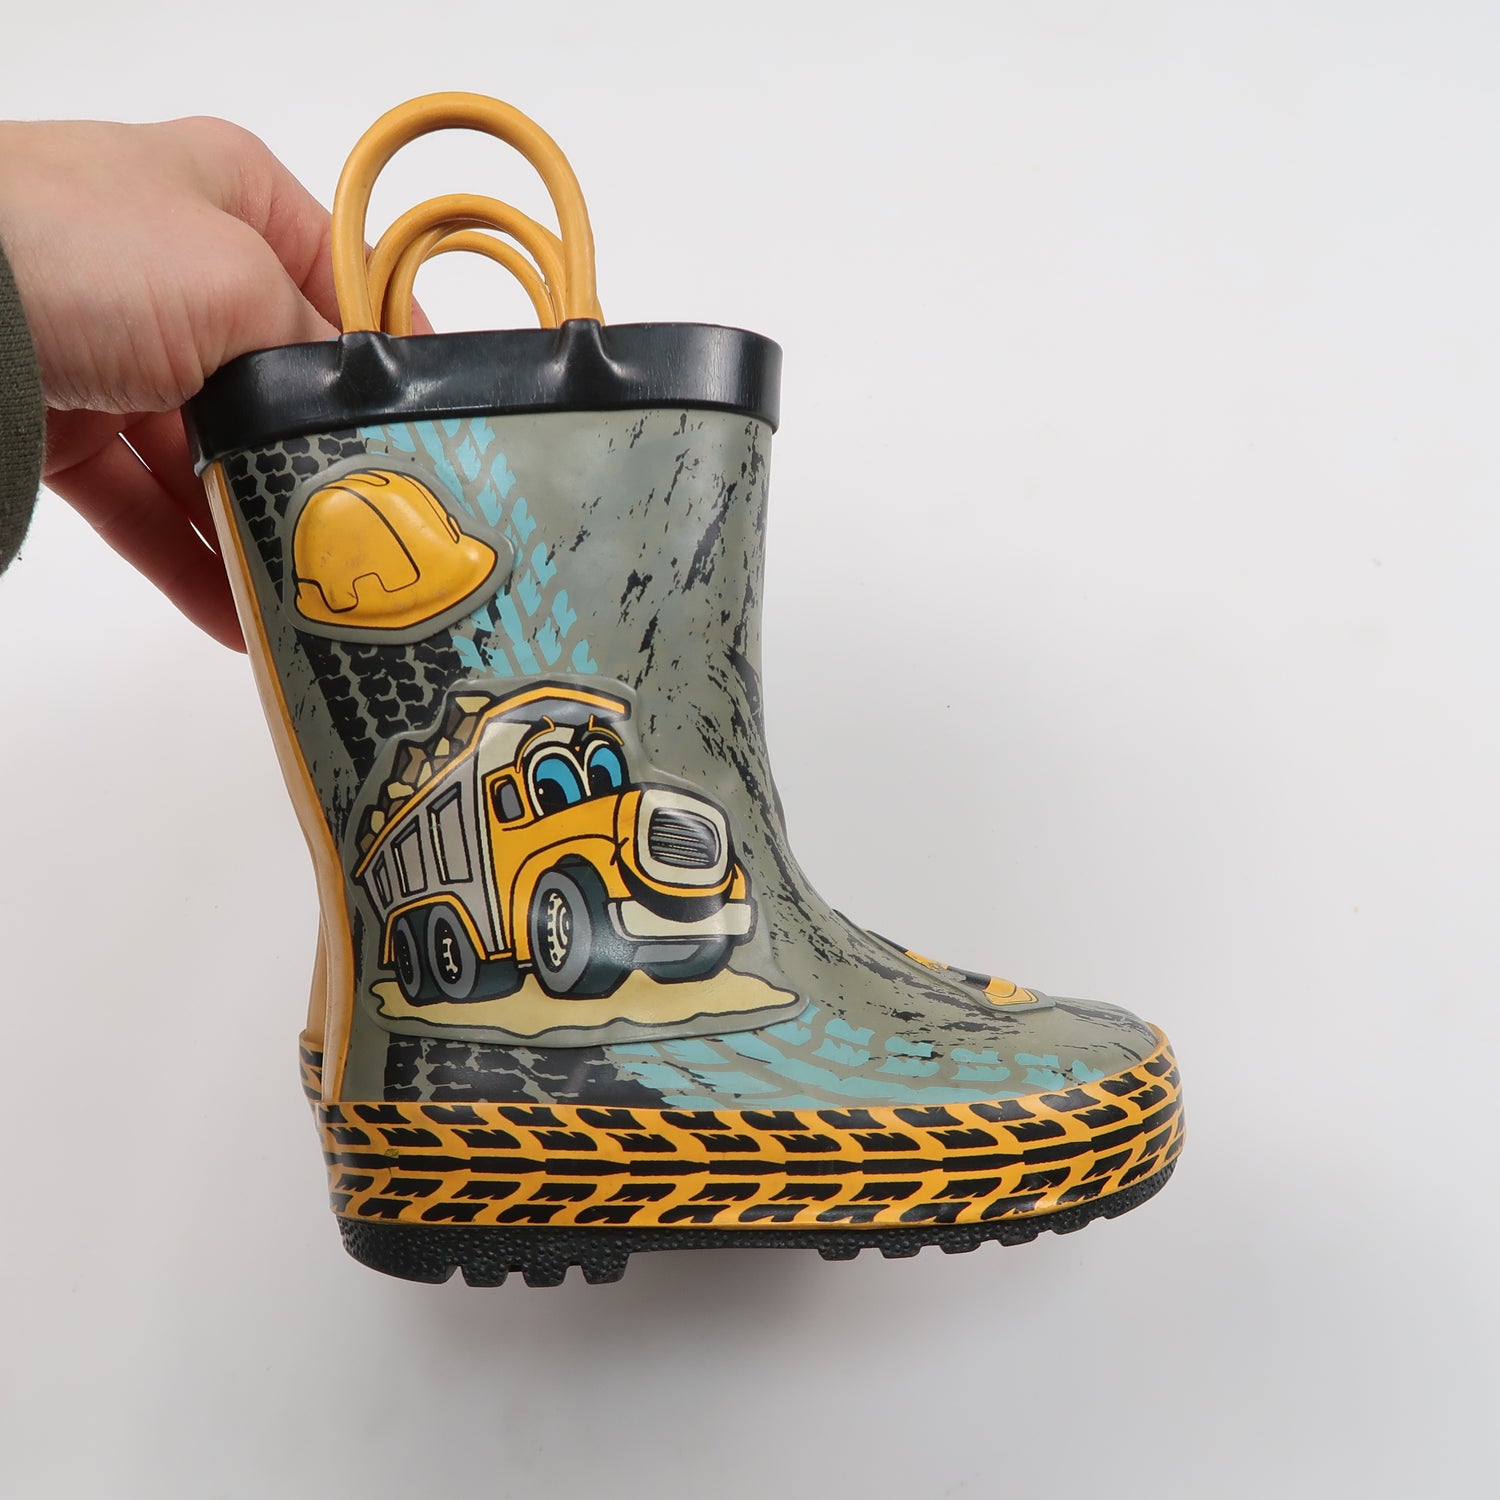 Unknown Brand - Rubber Boots (Shoes - 5)